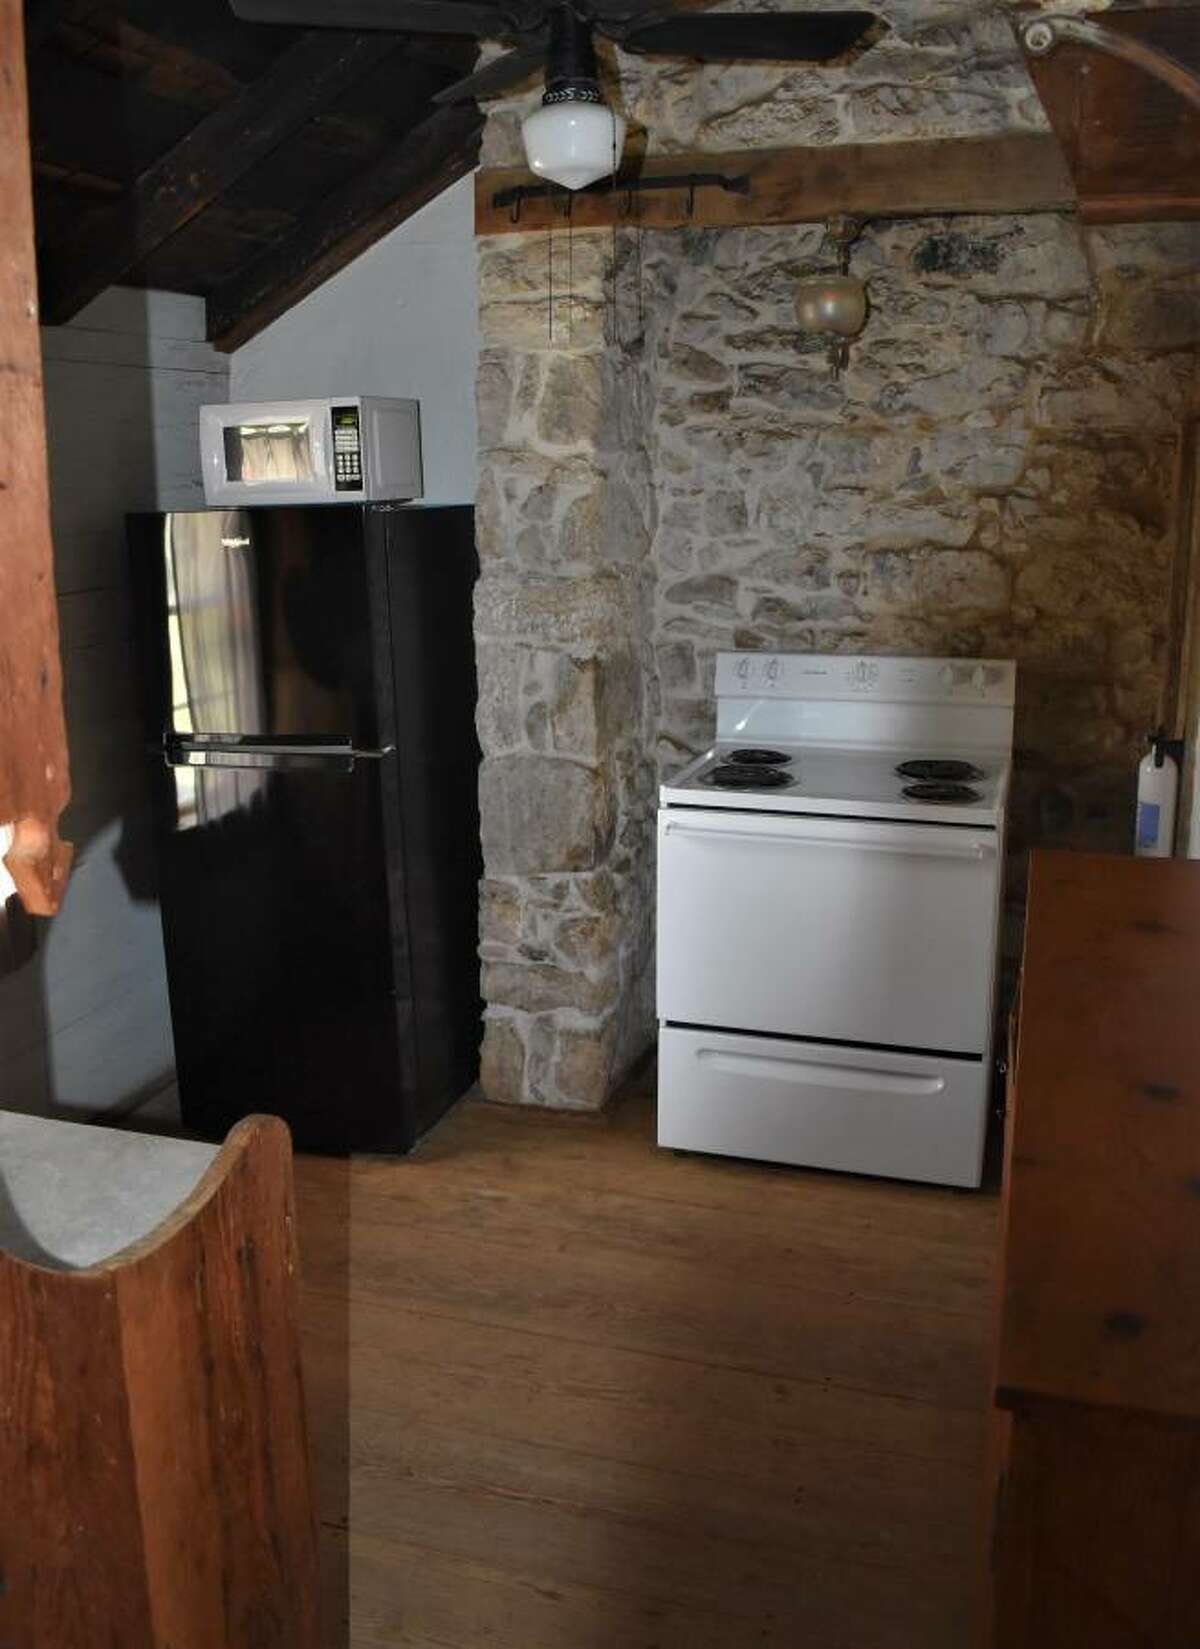 The kitchen appliances are simple, but the exposed limestone is charming.